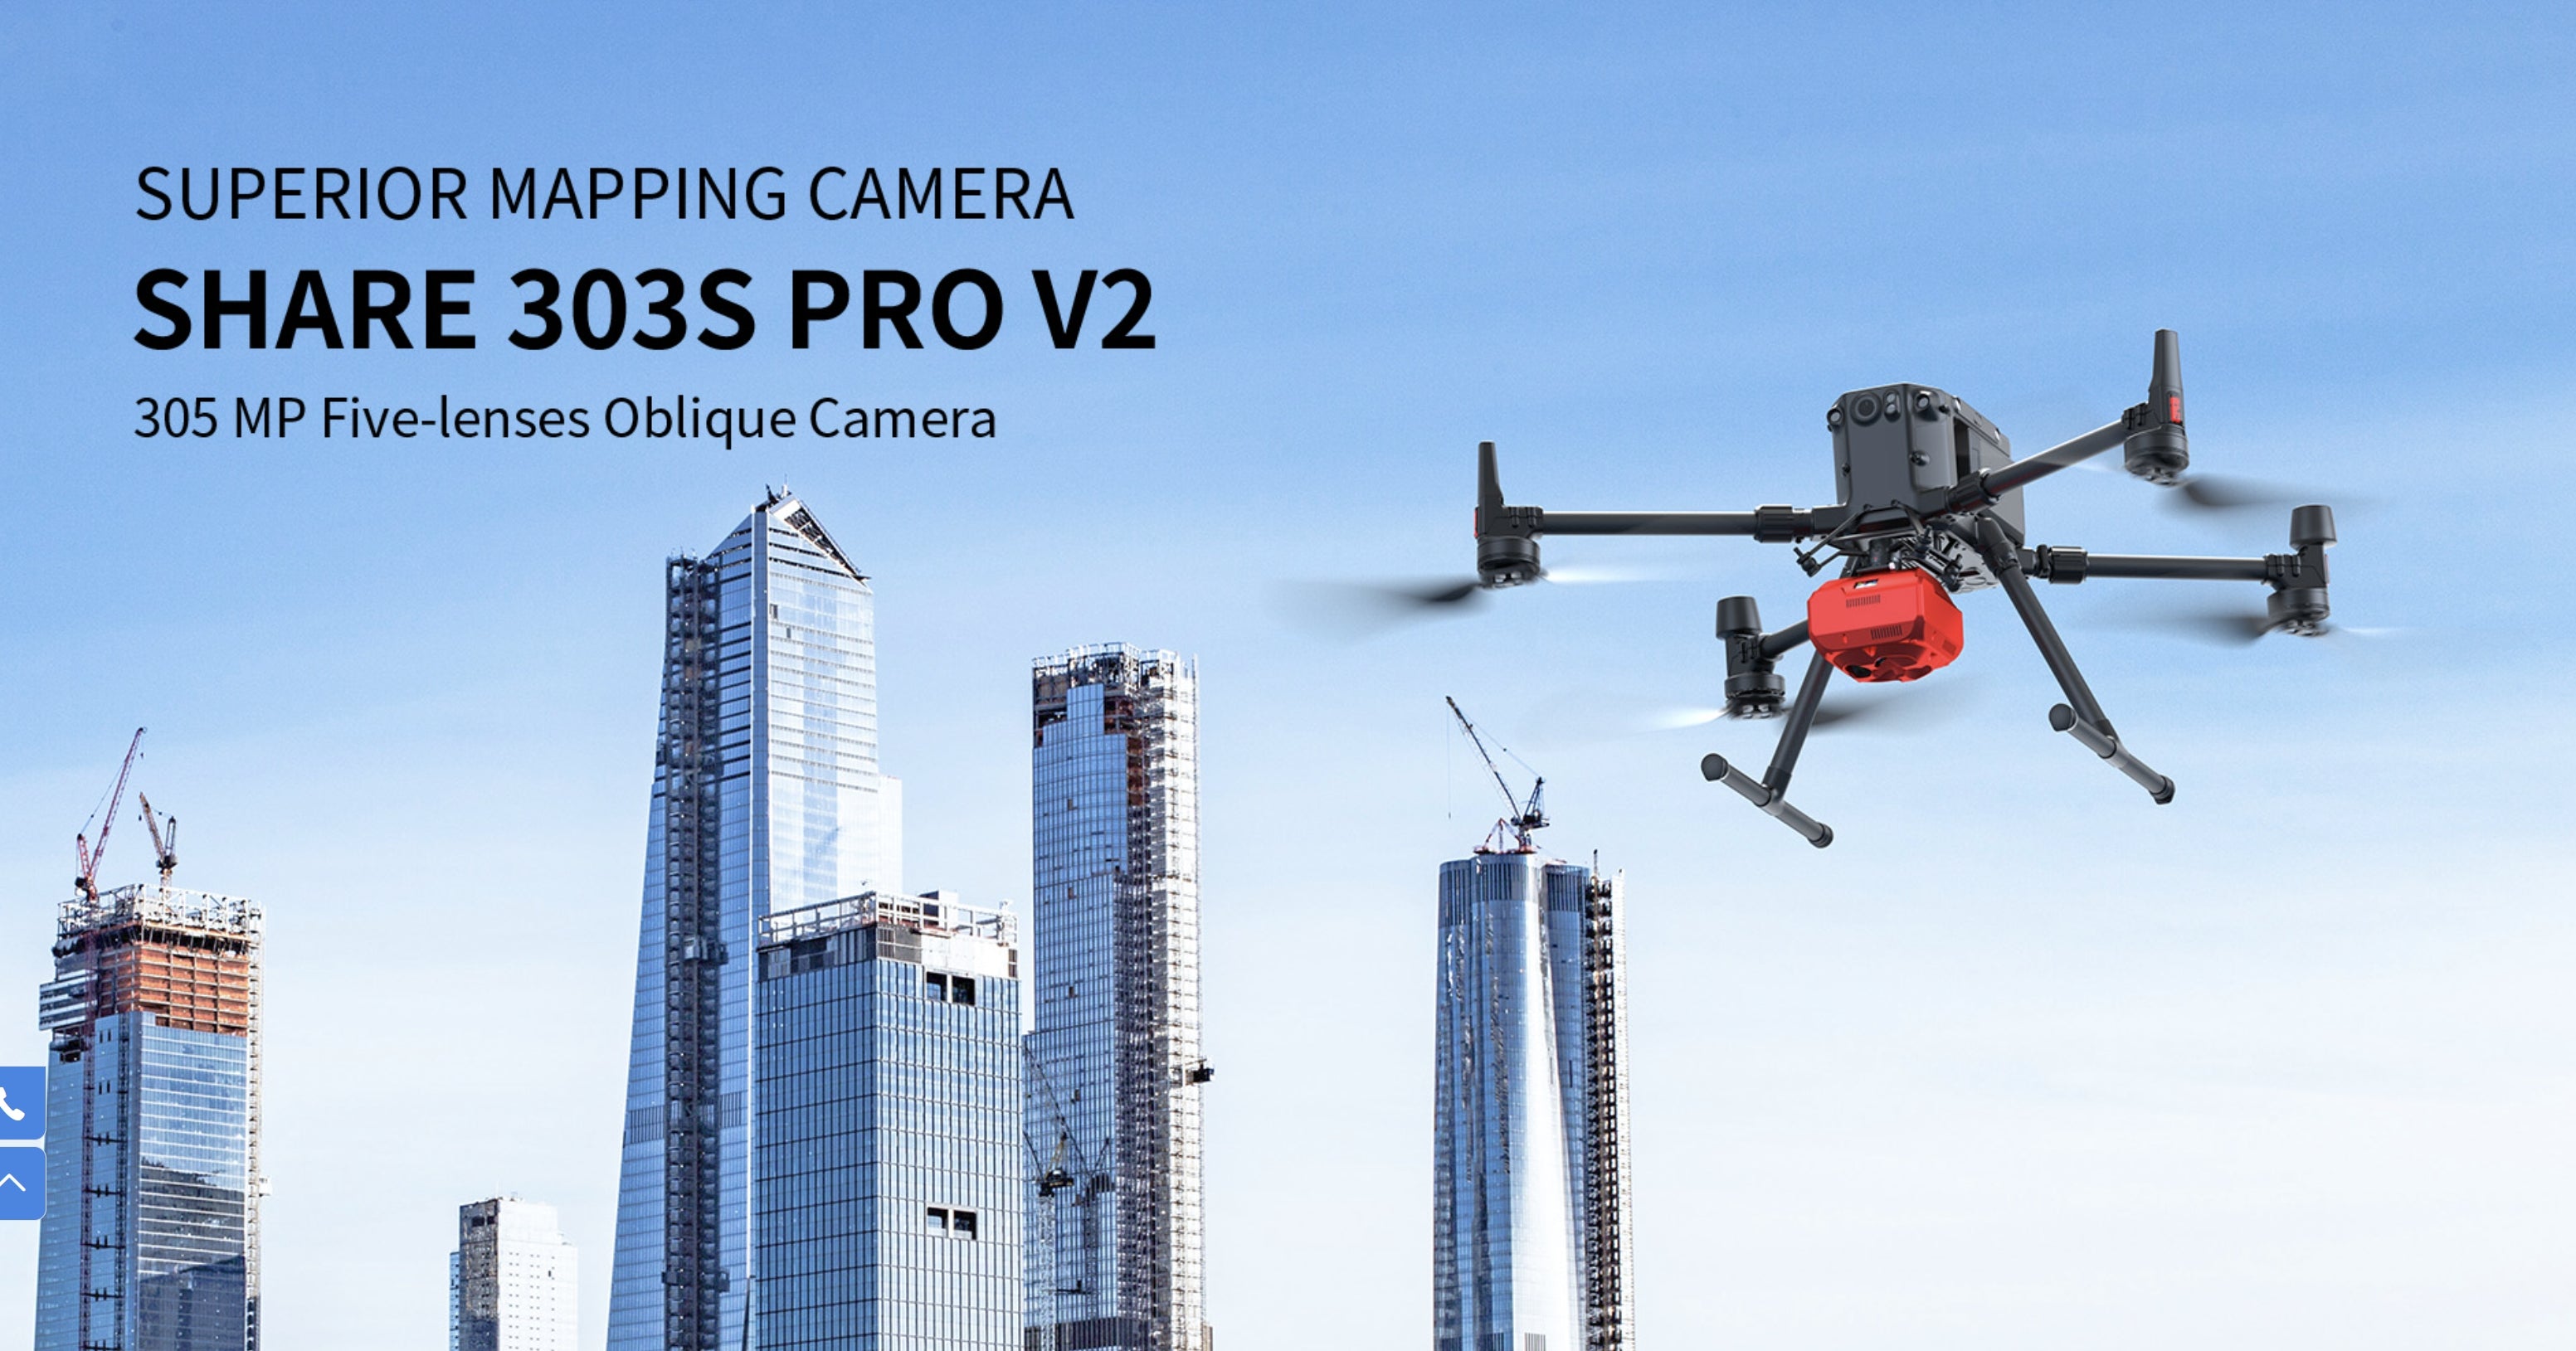 SHARE 303S Pro V2, High-resolution camera with five lenses for drone-based mapping and aerial imaging.